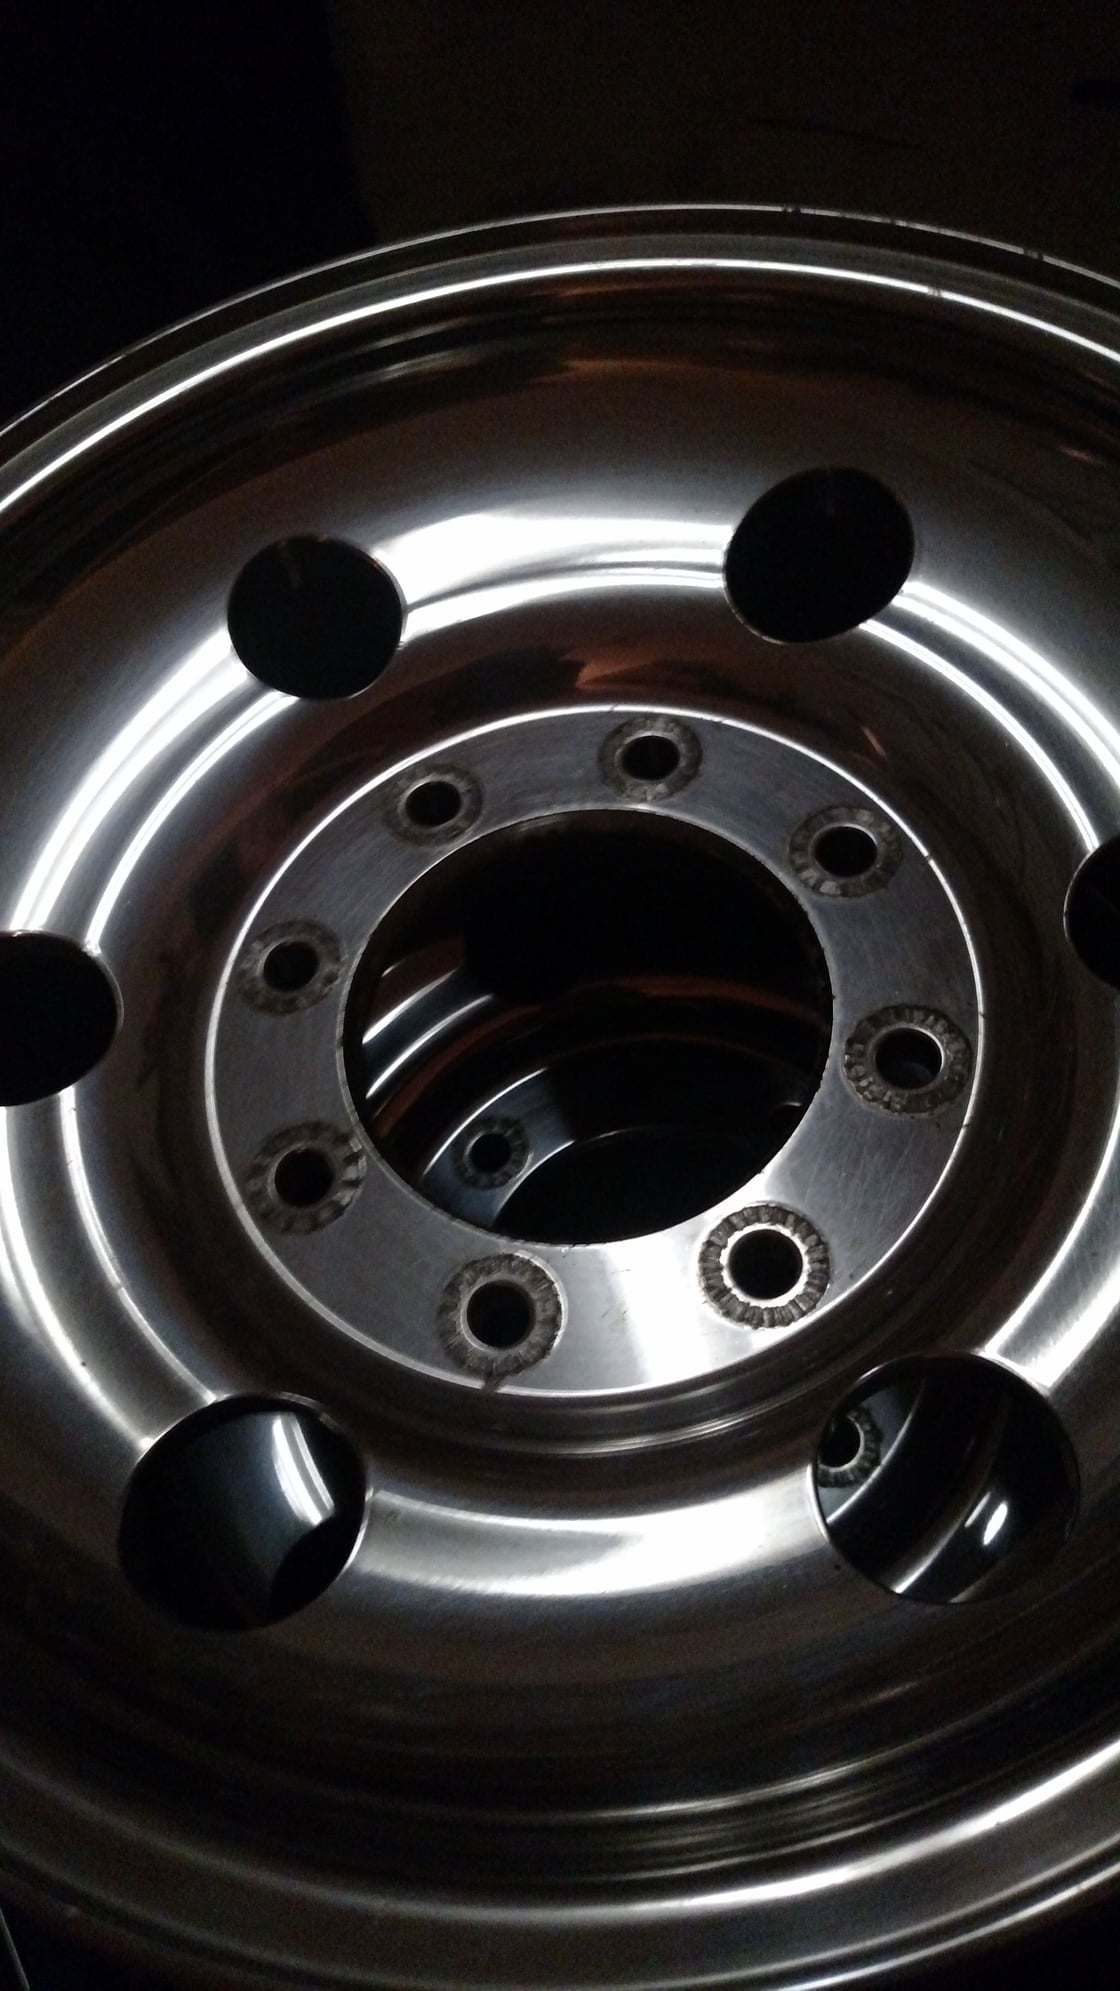 Lug nuts - Ford Truck Enthusiasts Forums